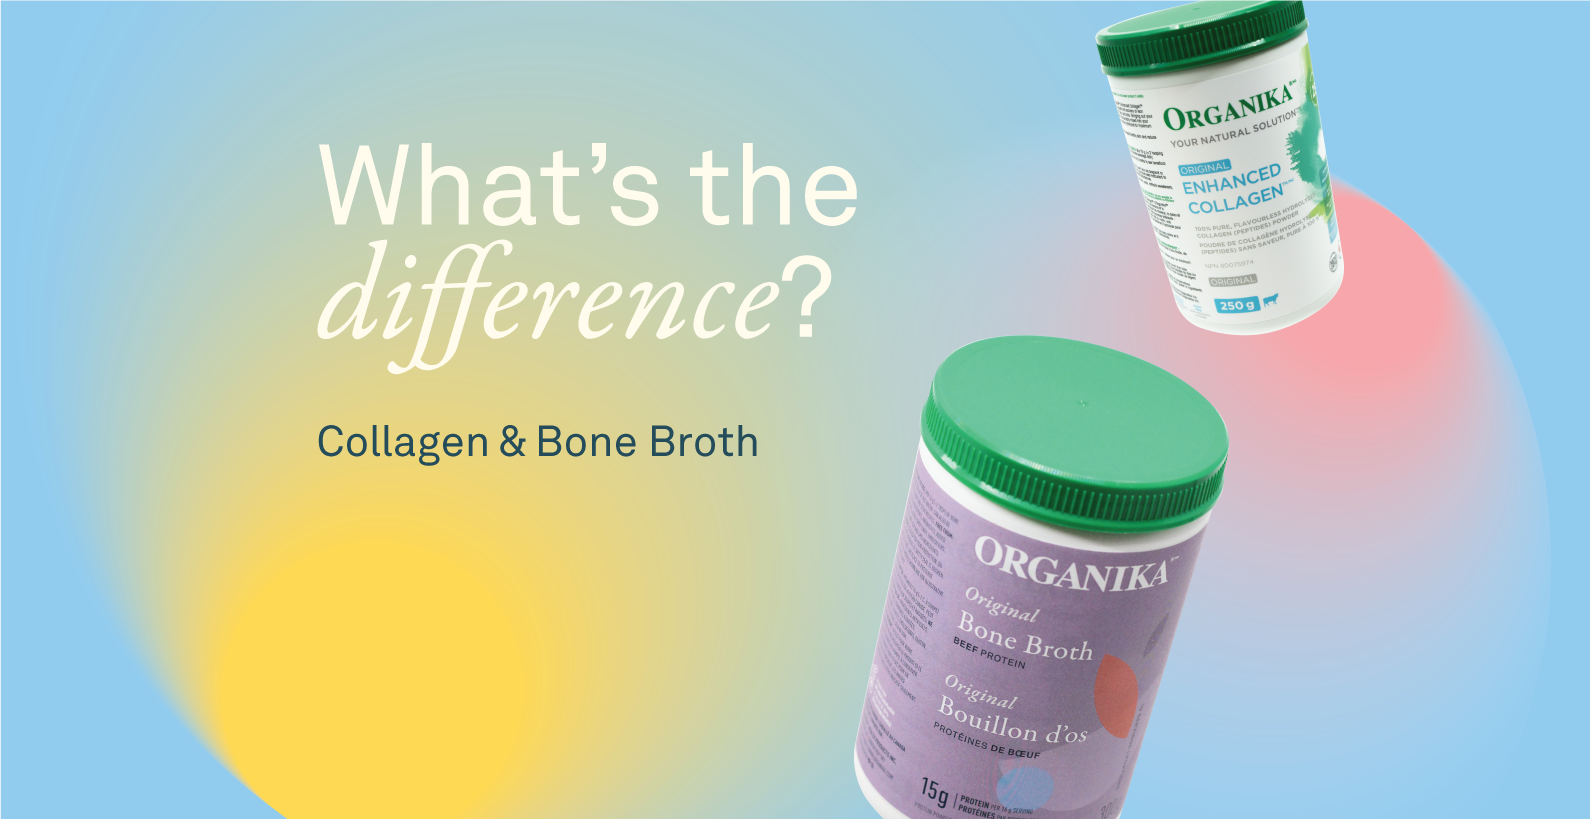 what's the difference between bone broth and collagen peptides?